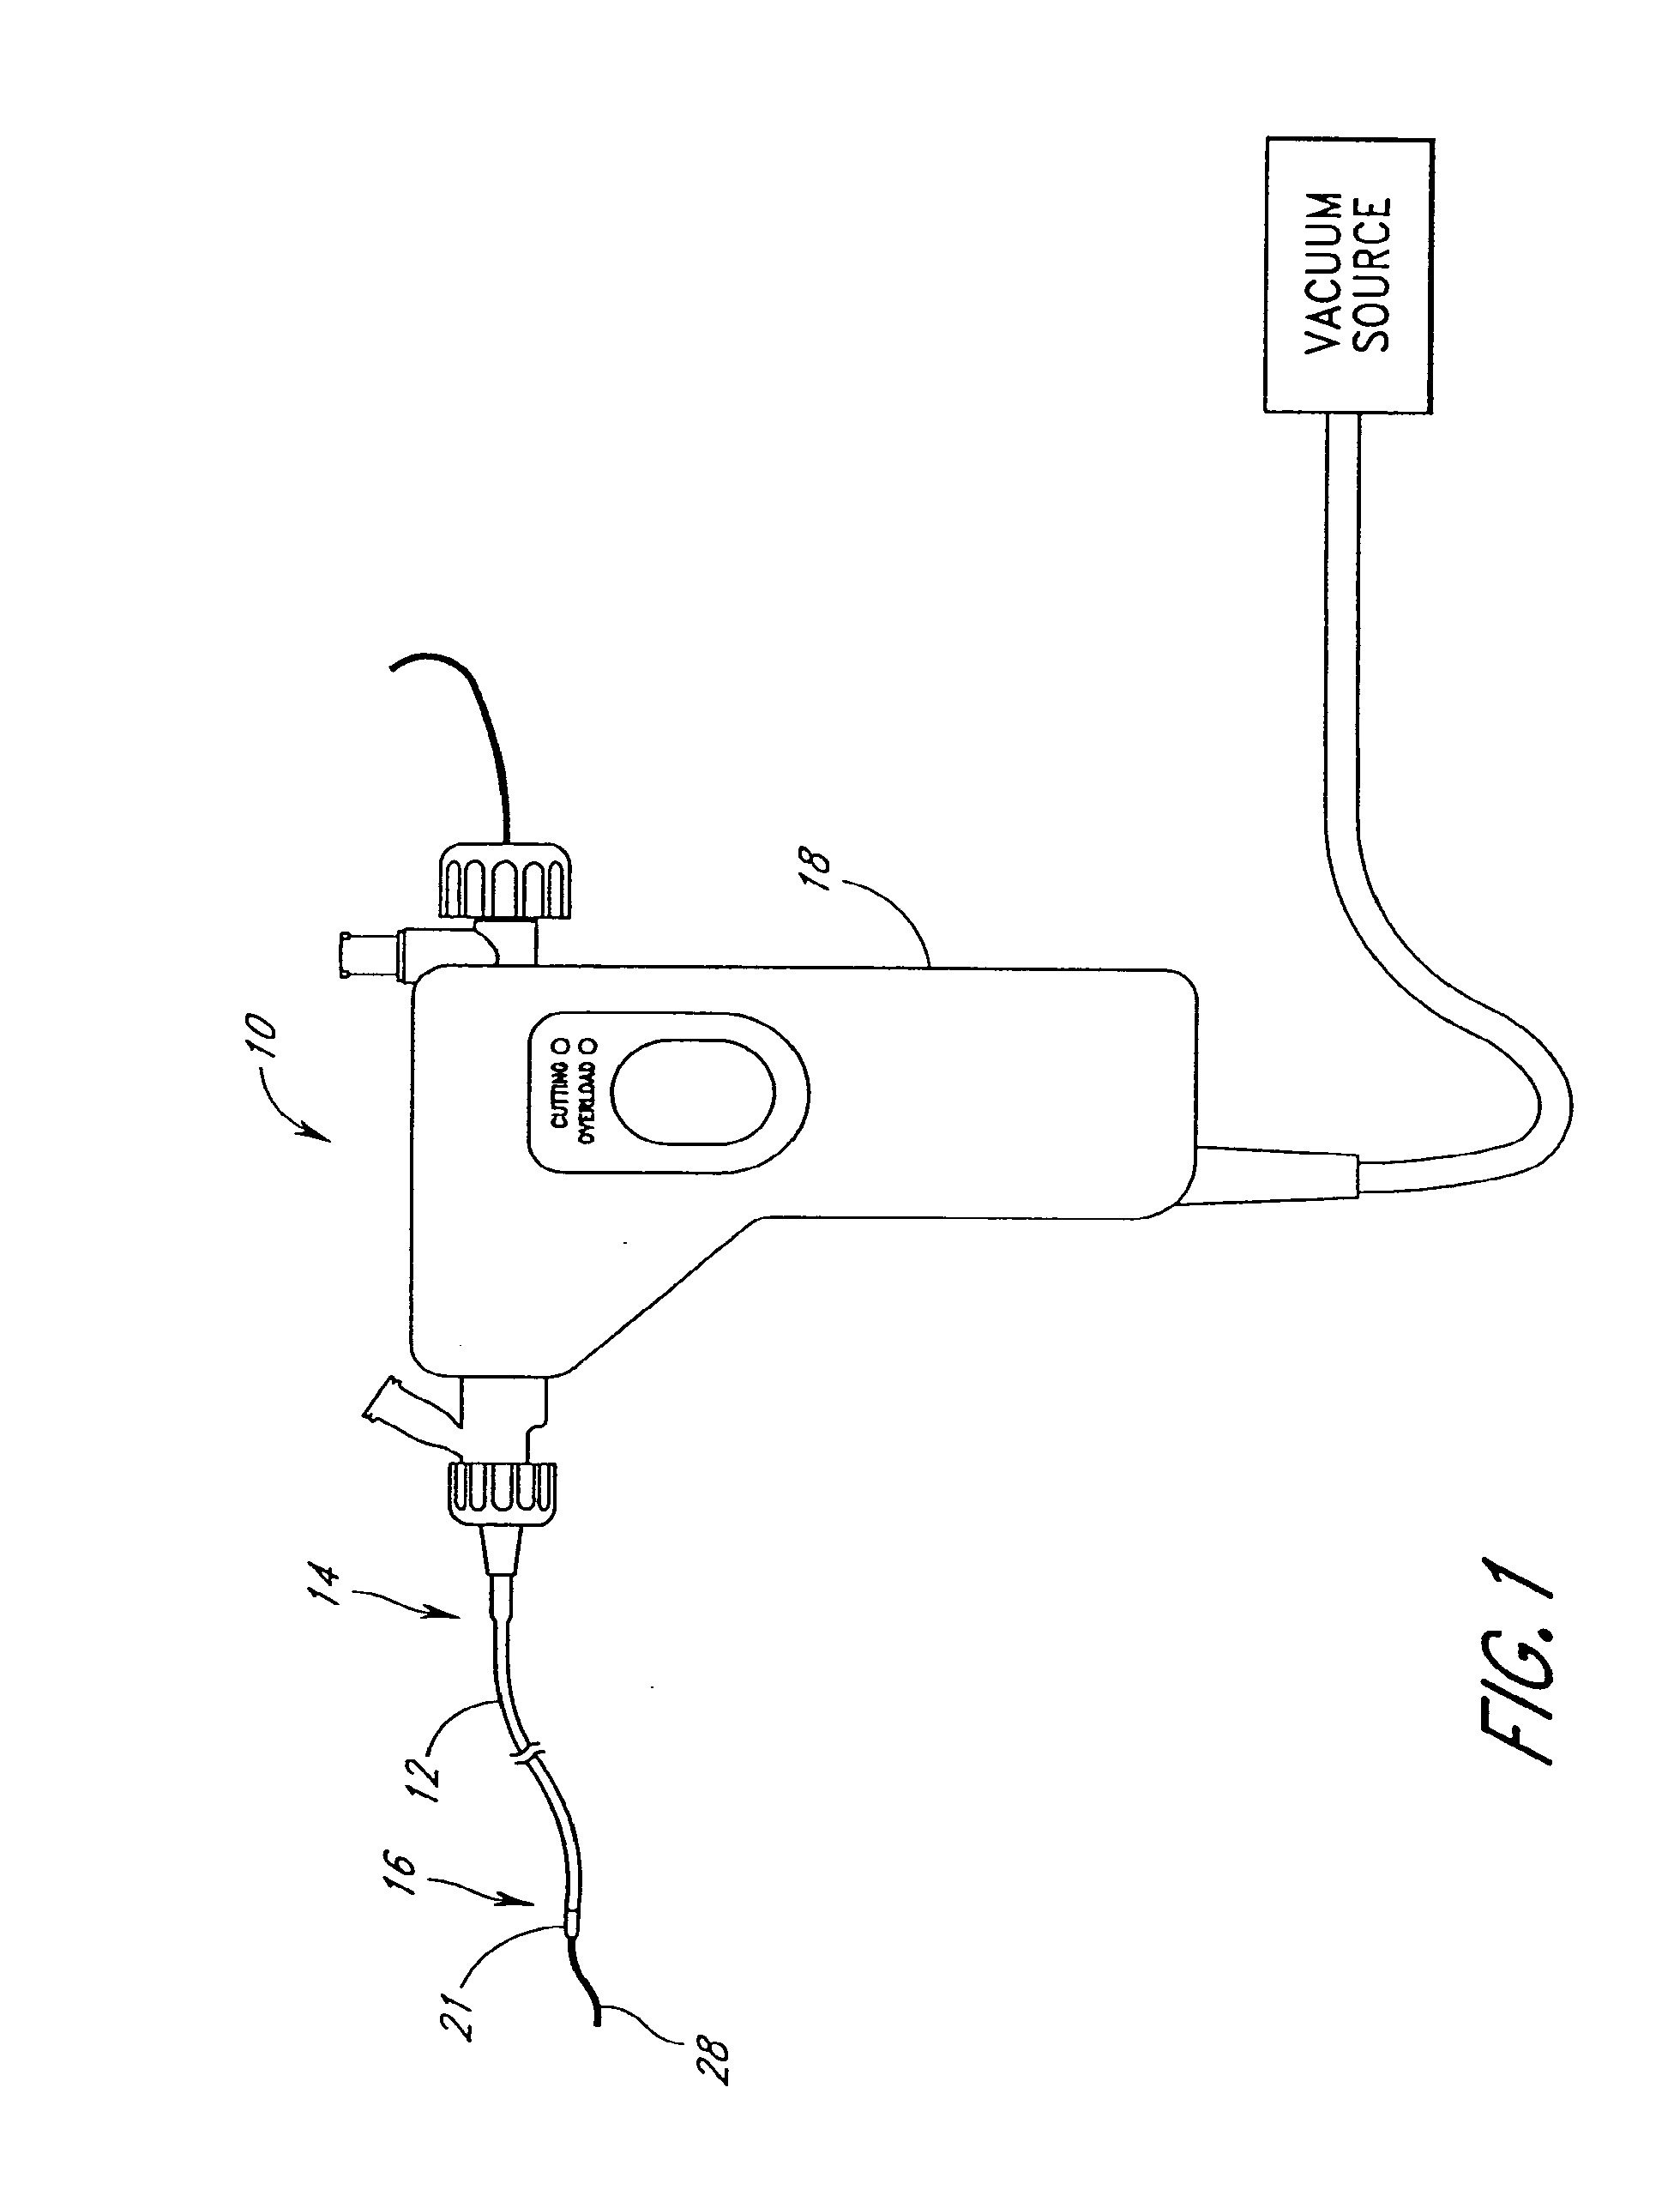 Rotational atherectomy system and methods of use